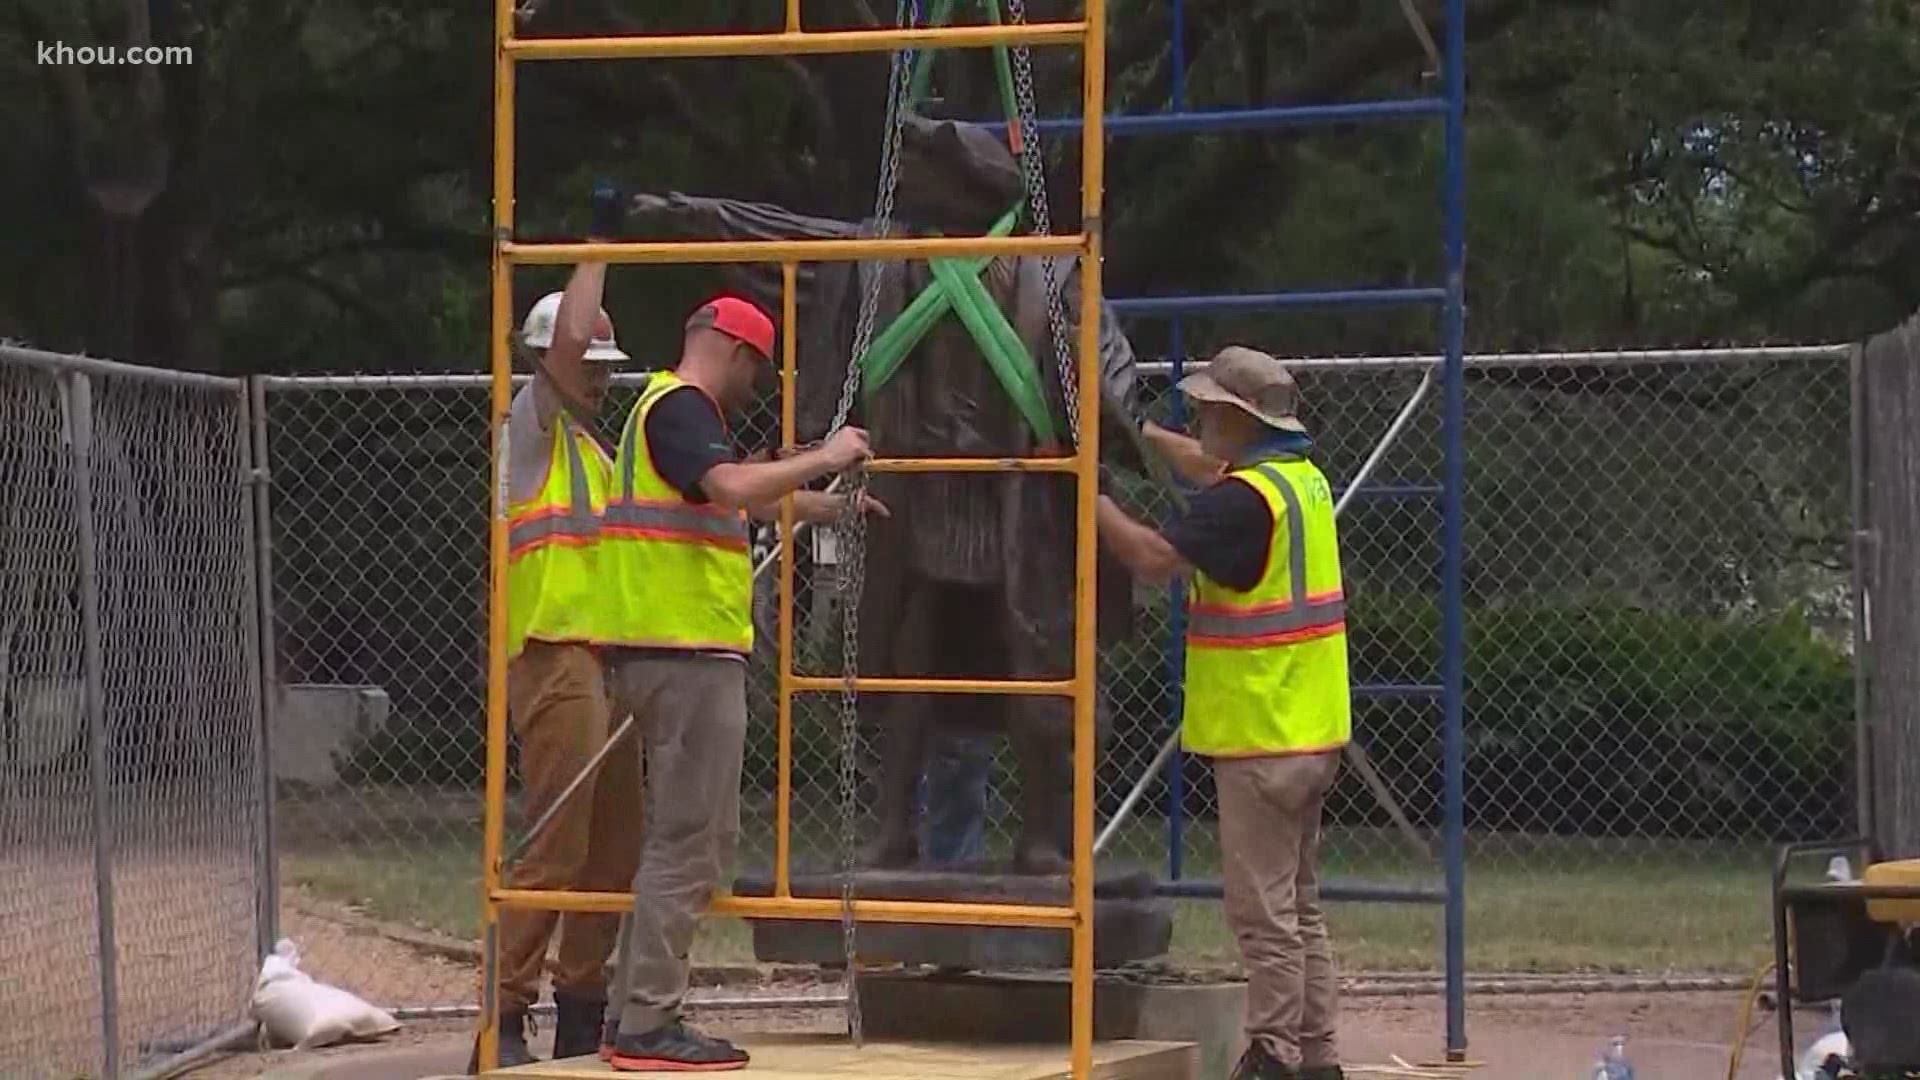 Native Americans have been protesting for years to get the statue of Christopher Columbus removed. Friday, it was finally removed after it was vandalized 3 times.